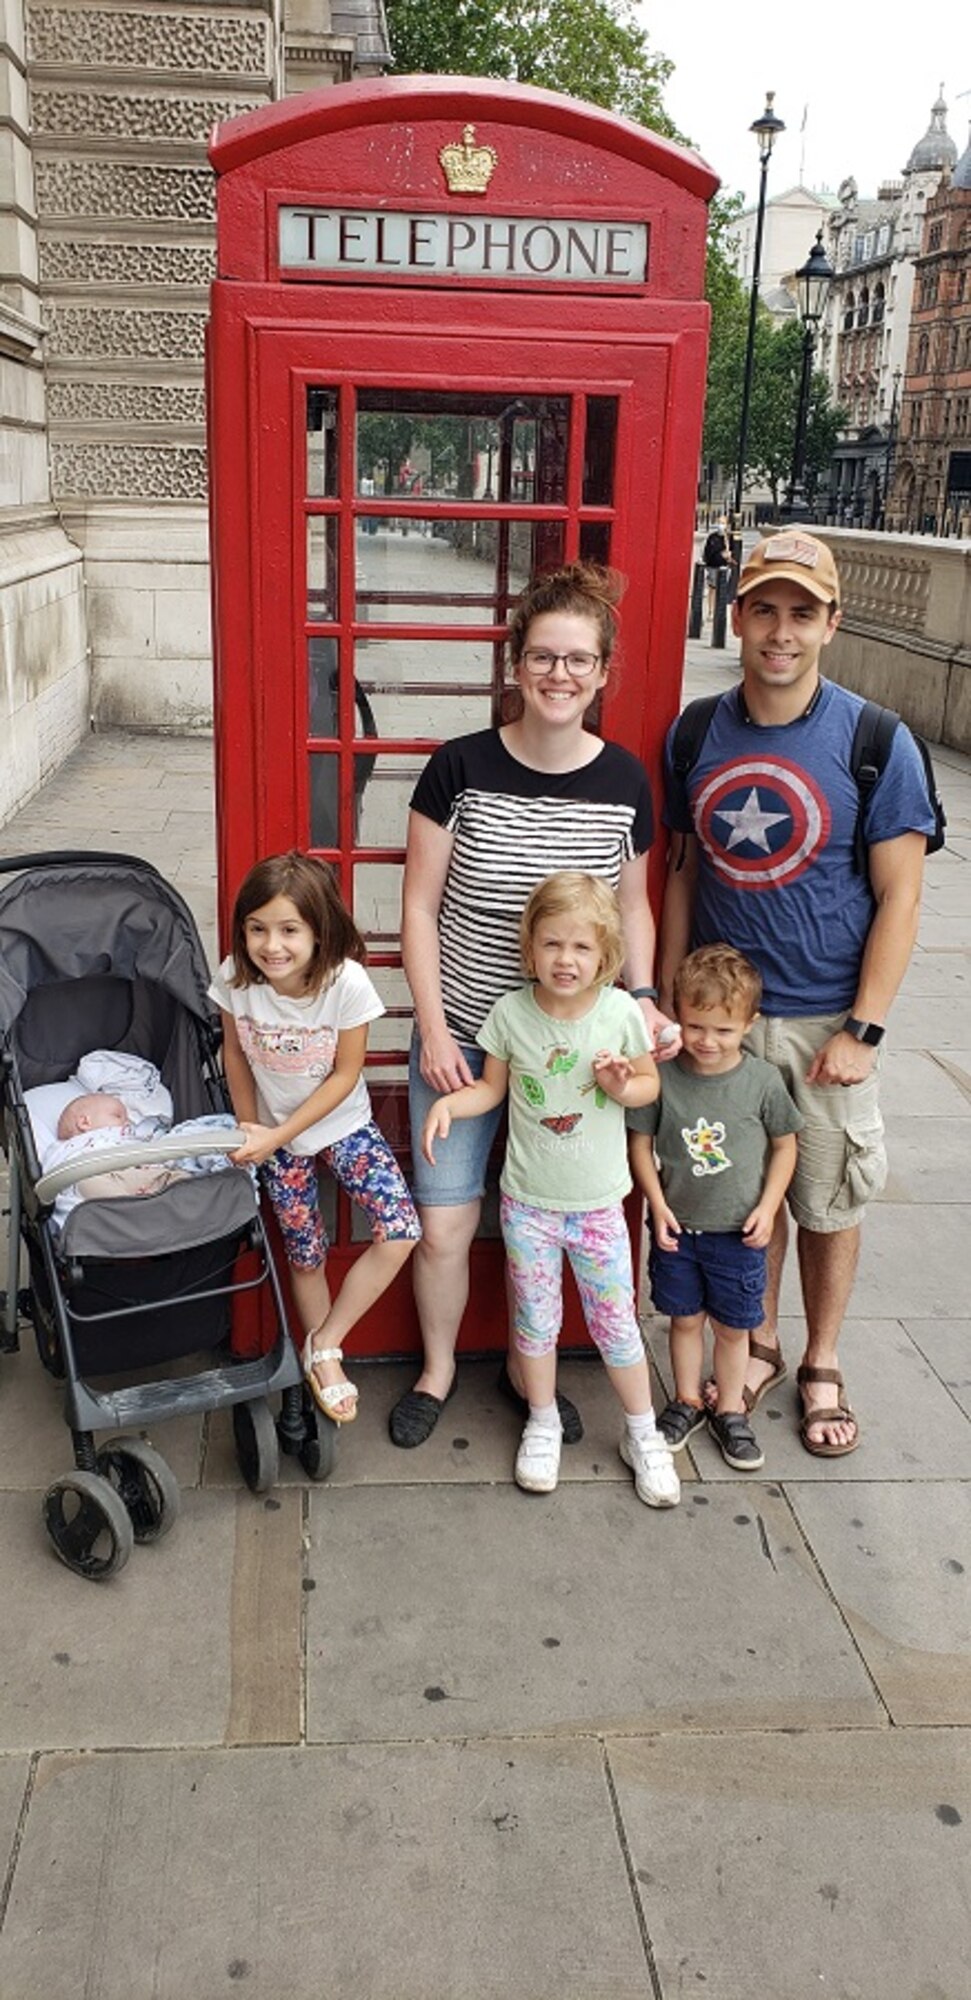 Air Force Research Laboratory exchange officer to the United Kingdom Capt. Jacob Singleton and his family visiting London. (Courtesy photo)